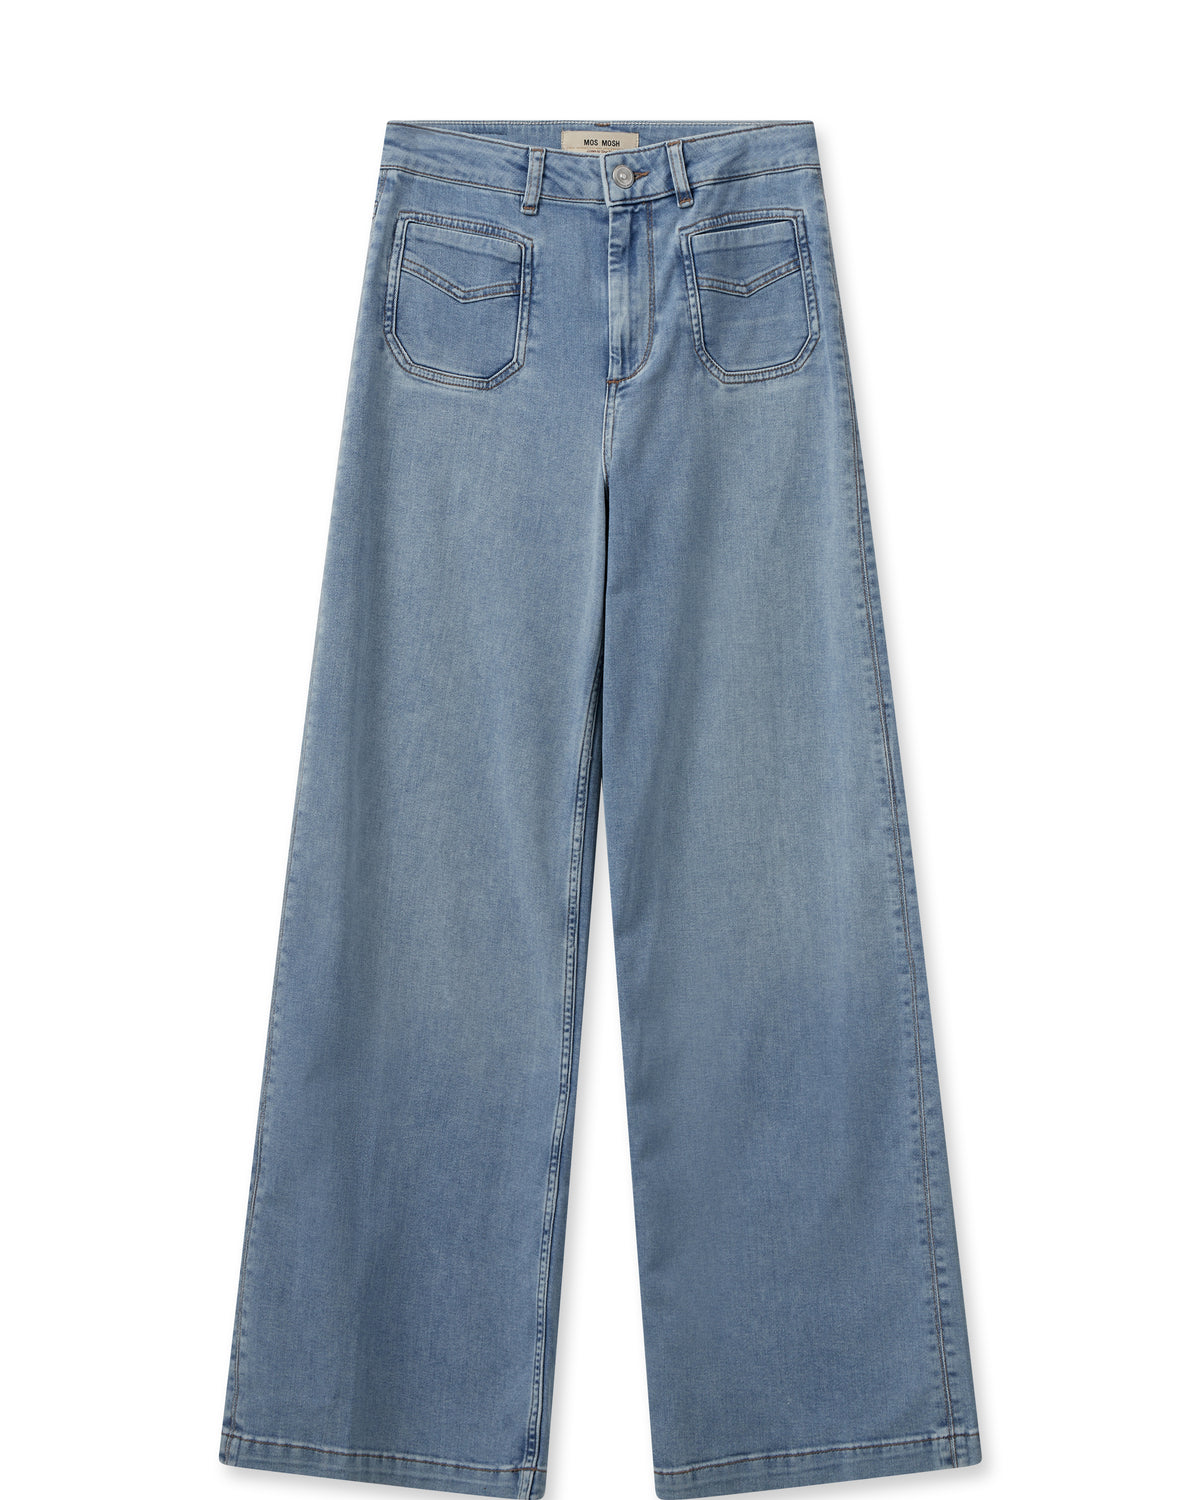 Wide leg light wash denim jeans with two front patch pockets and a rear welt pocket